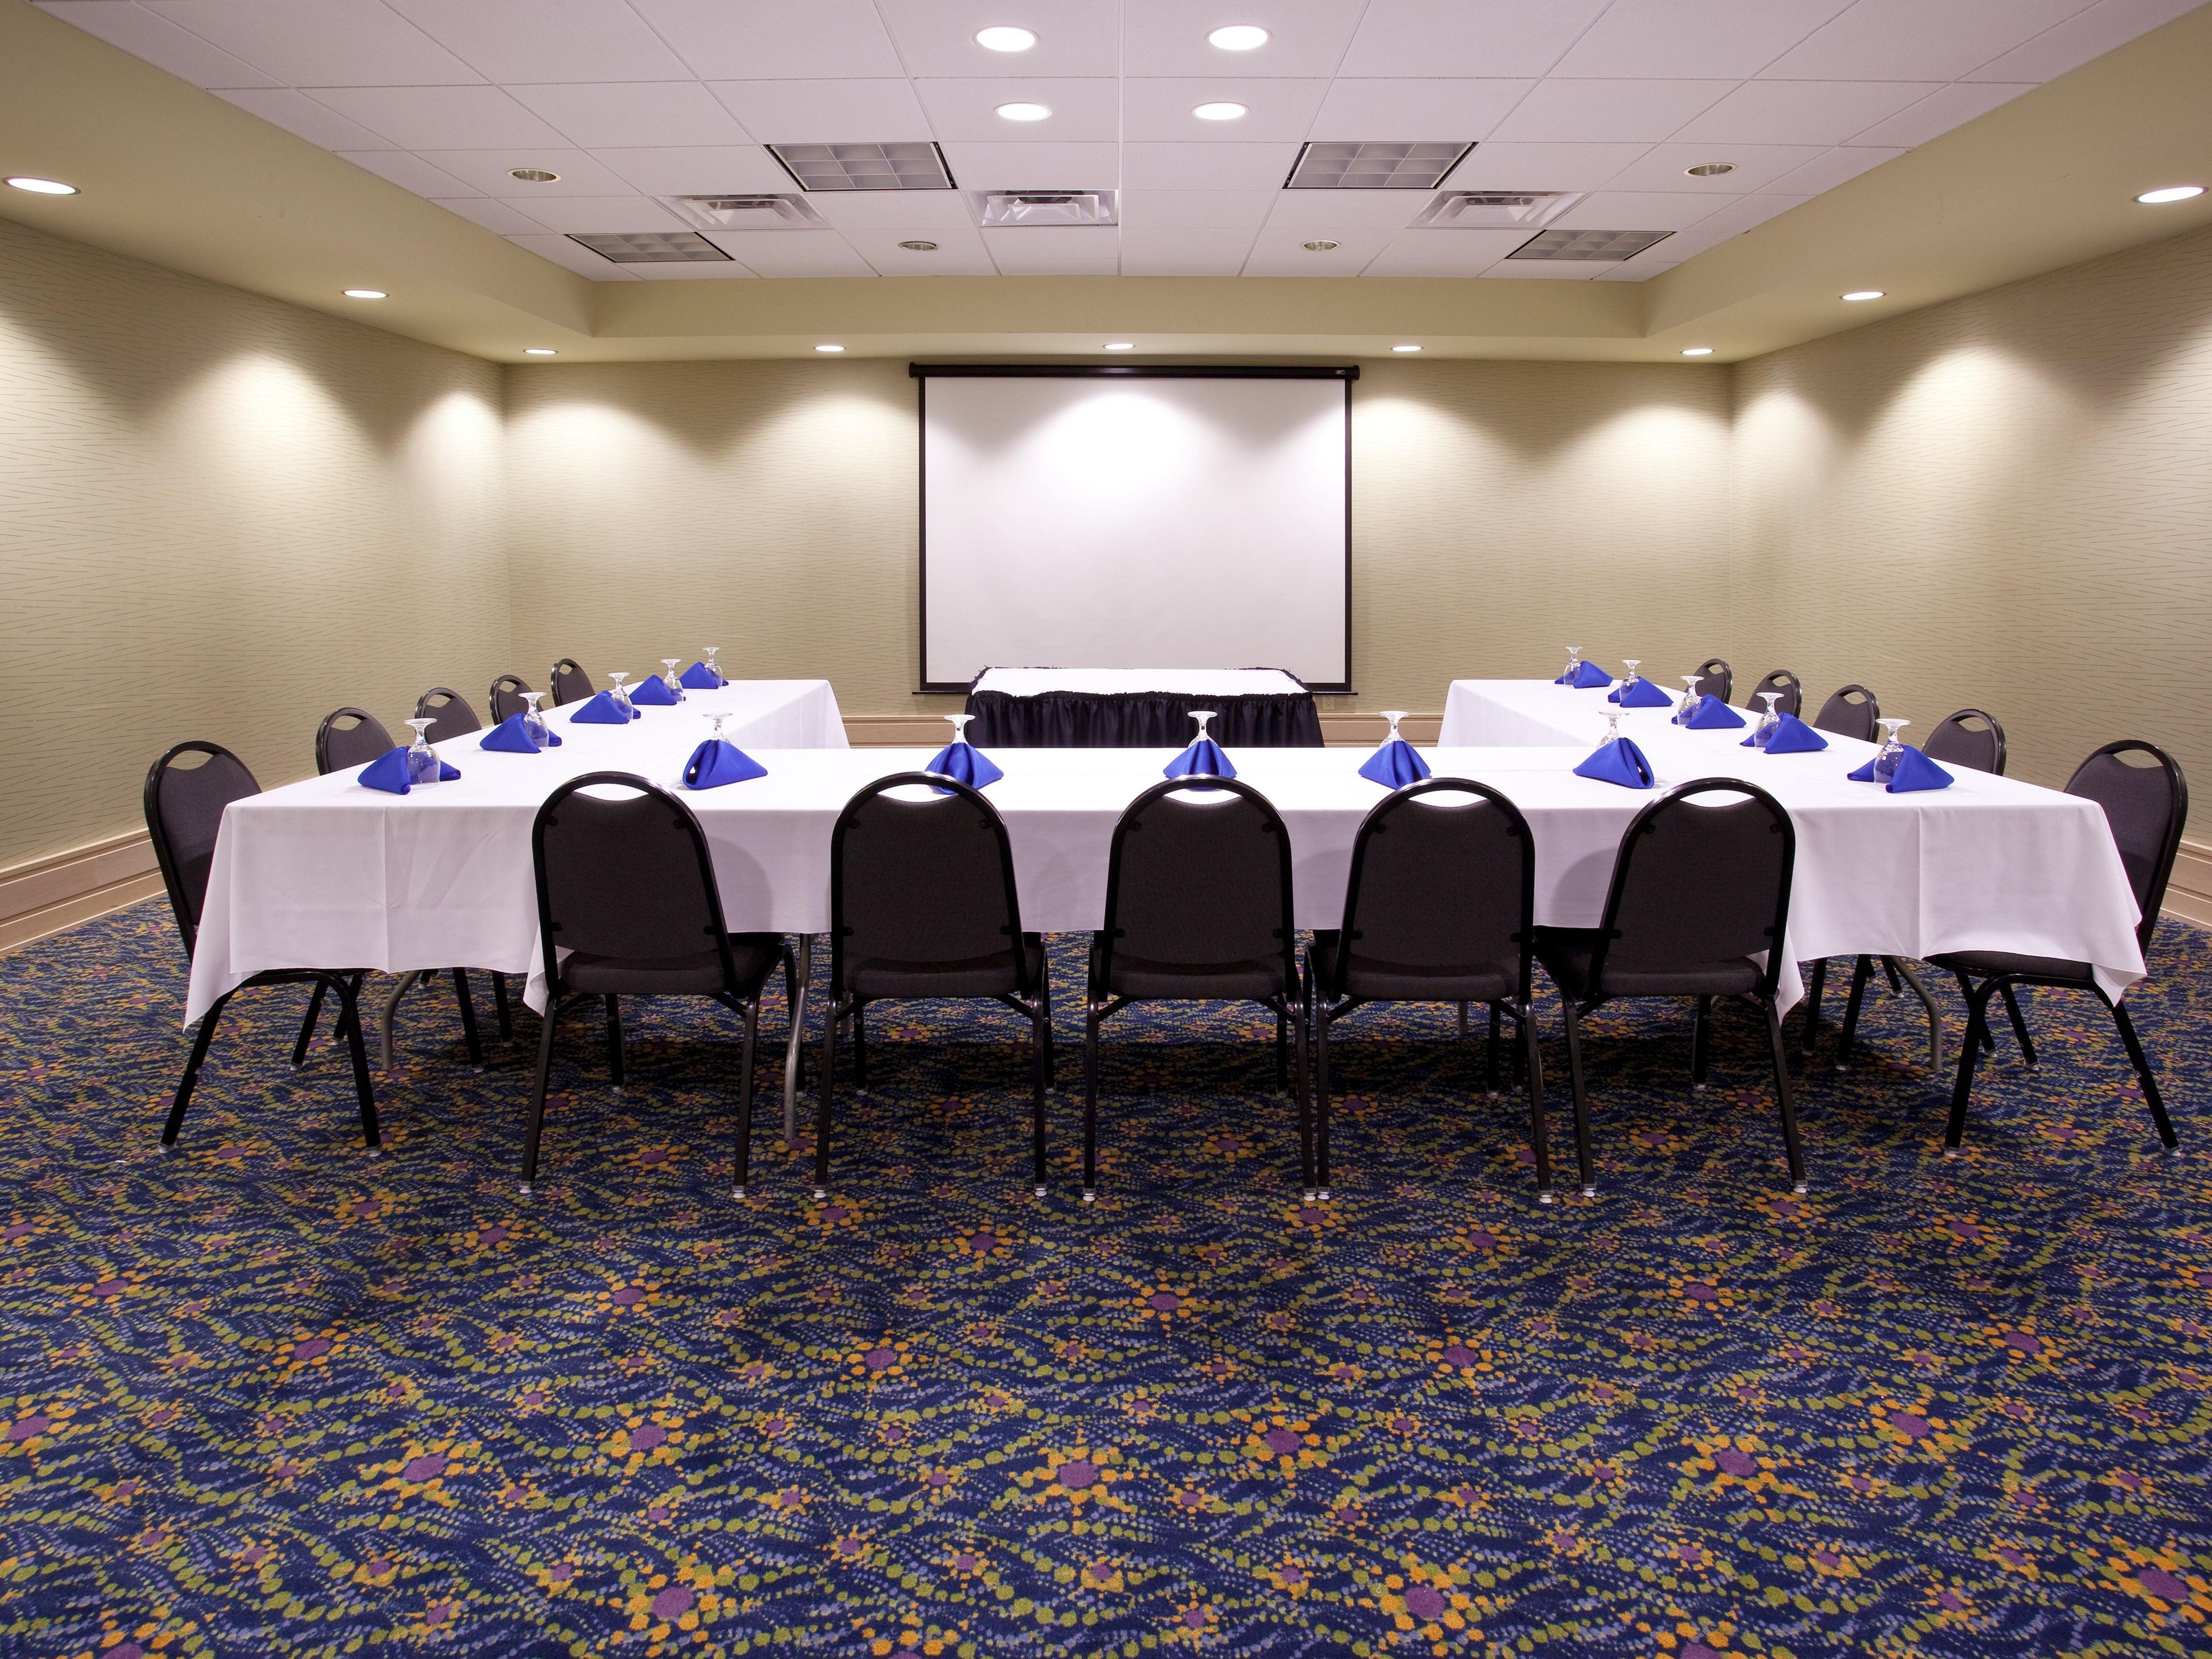 If you are looking for a place to house your next meeting or event, we are here for you.  Our 3 beautiful meeting rooms can accommodate 2-300 people.  Along with catering from our in house banquet staff, we have all you need to make your event successful. 